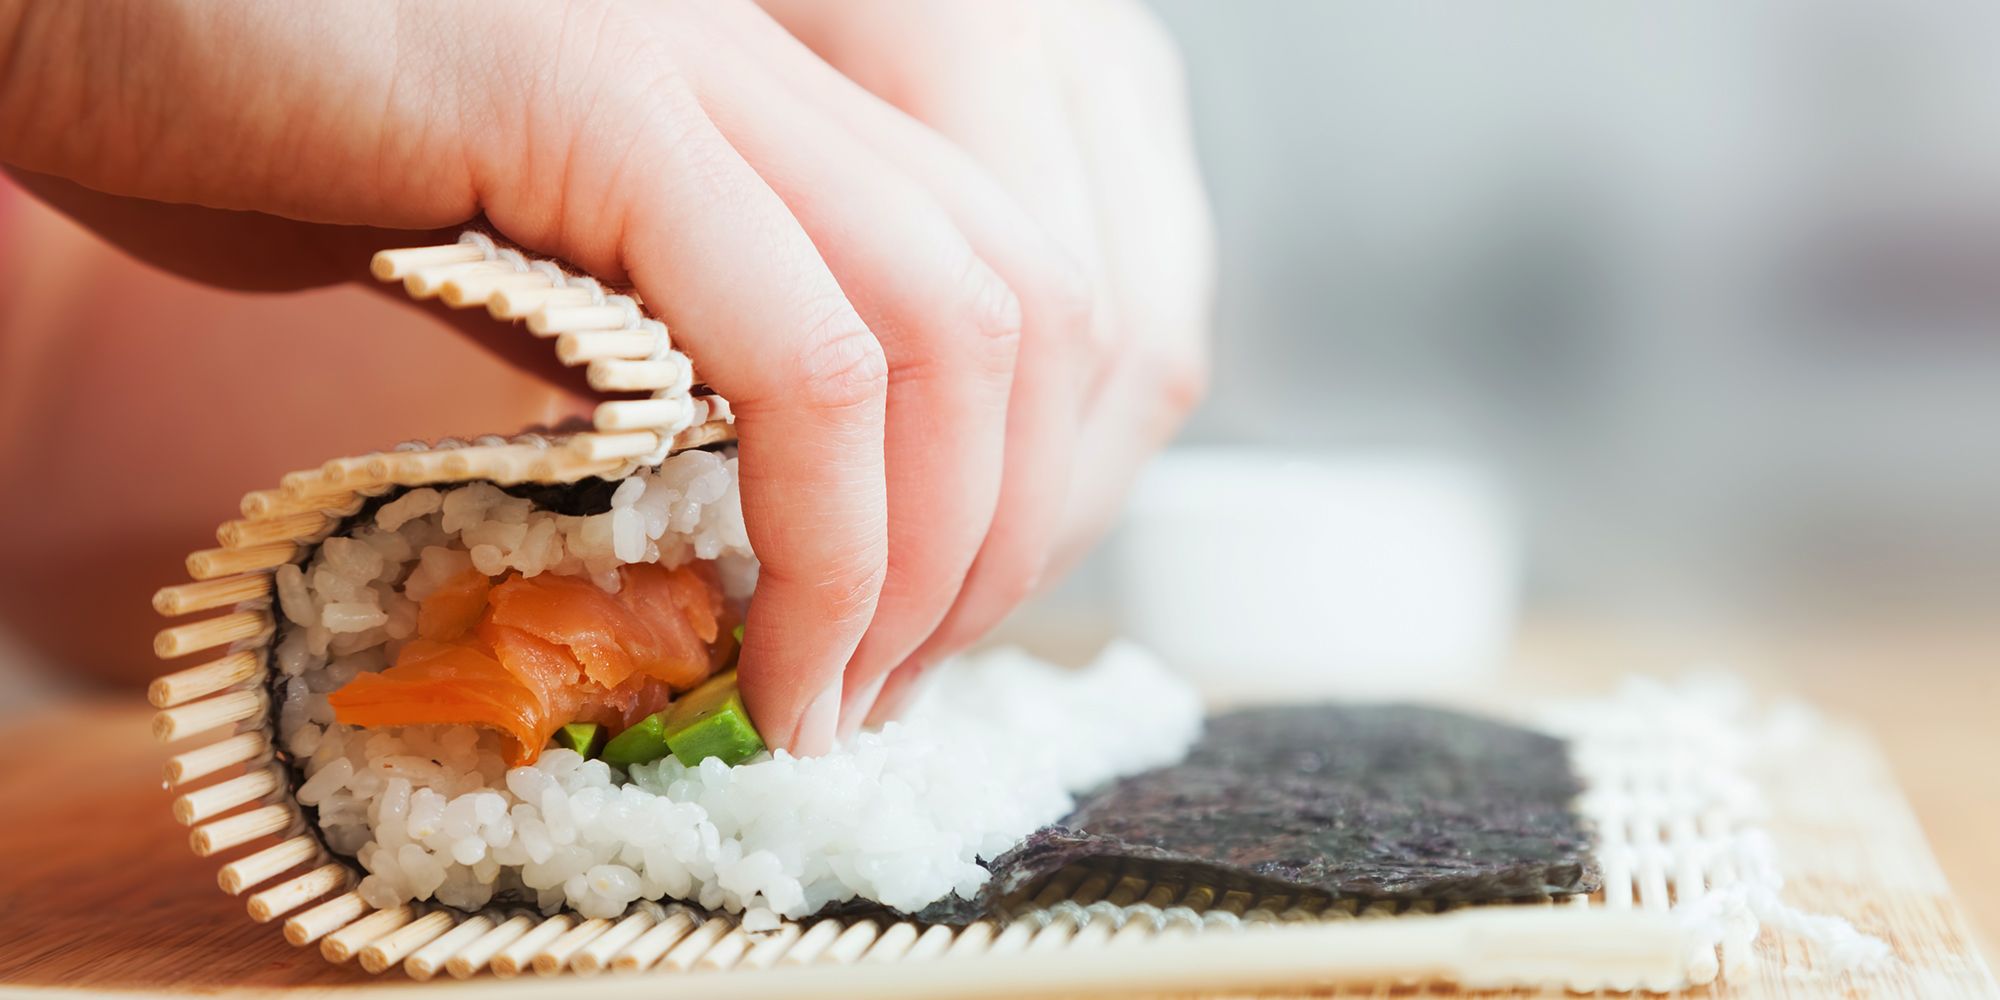 symptoms of mercury poisoning from fish